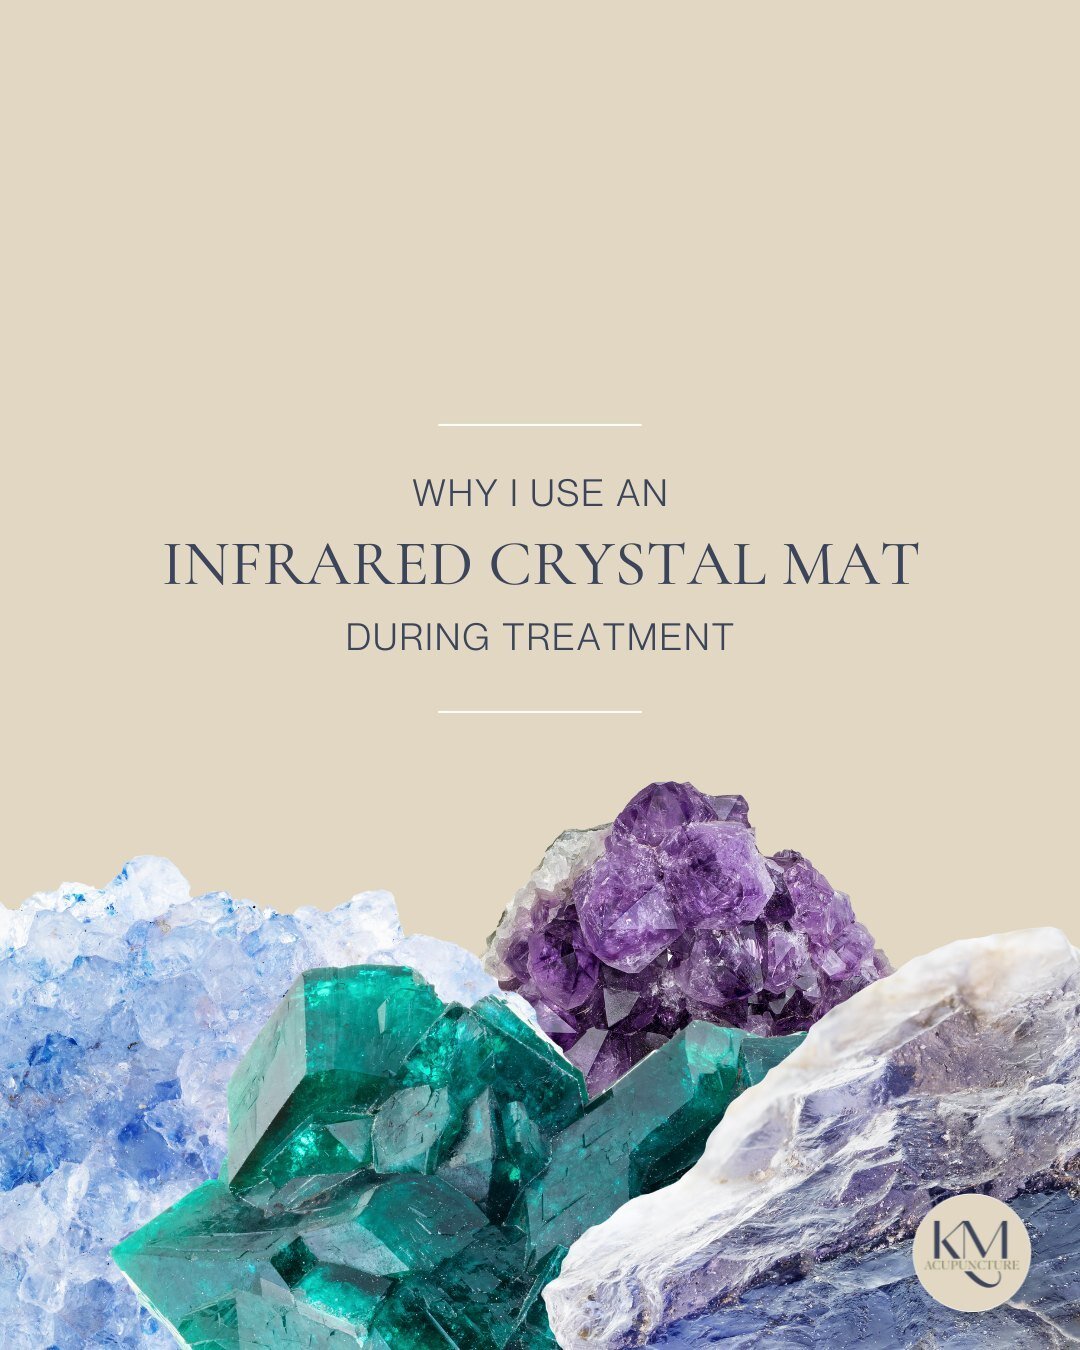 My acupuncture clients receive an enhanced healing experience due to the crystals and their placement within the infrared crystal mat.

Crystals have a particular vibration and frequency, which arise from their molecular composition. Because the huma